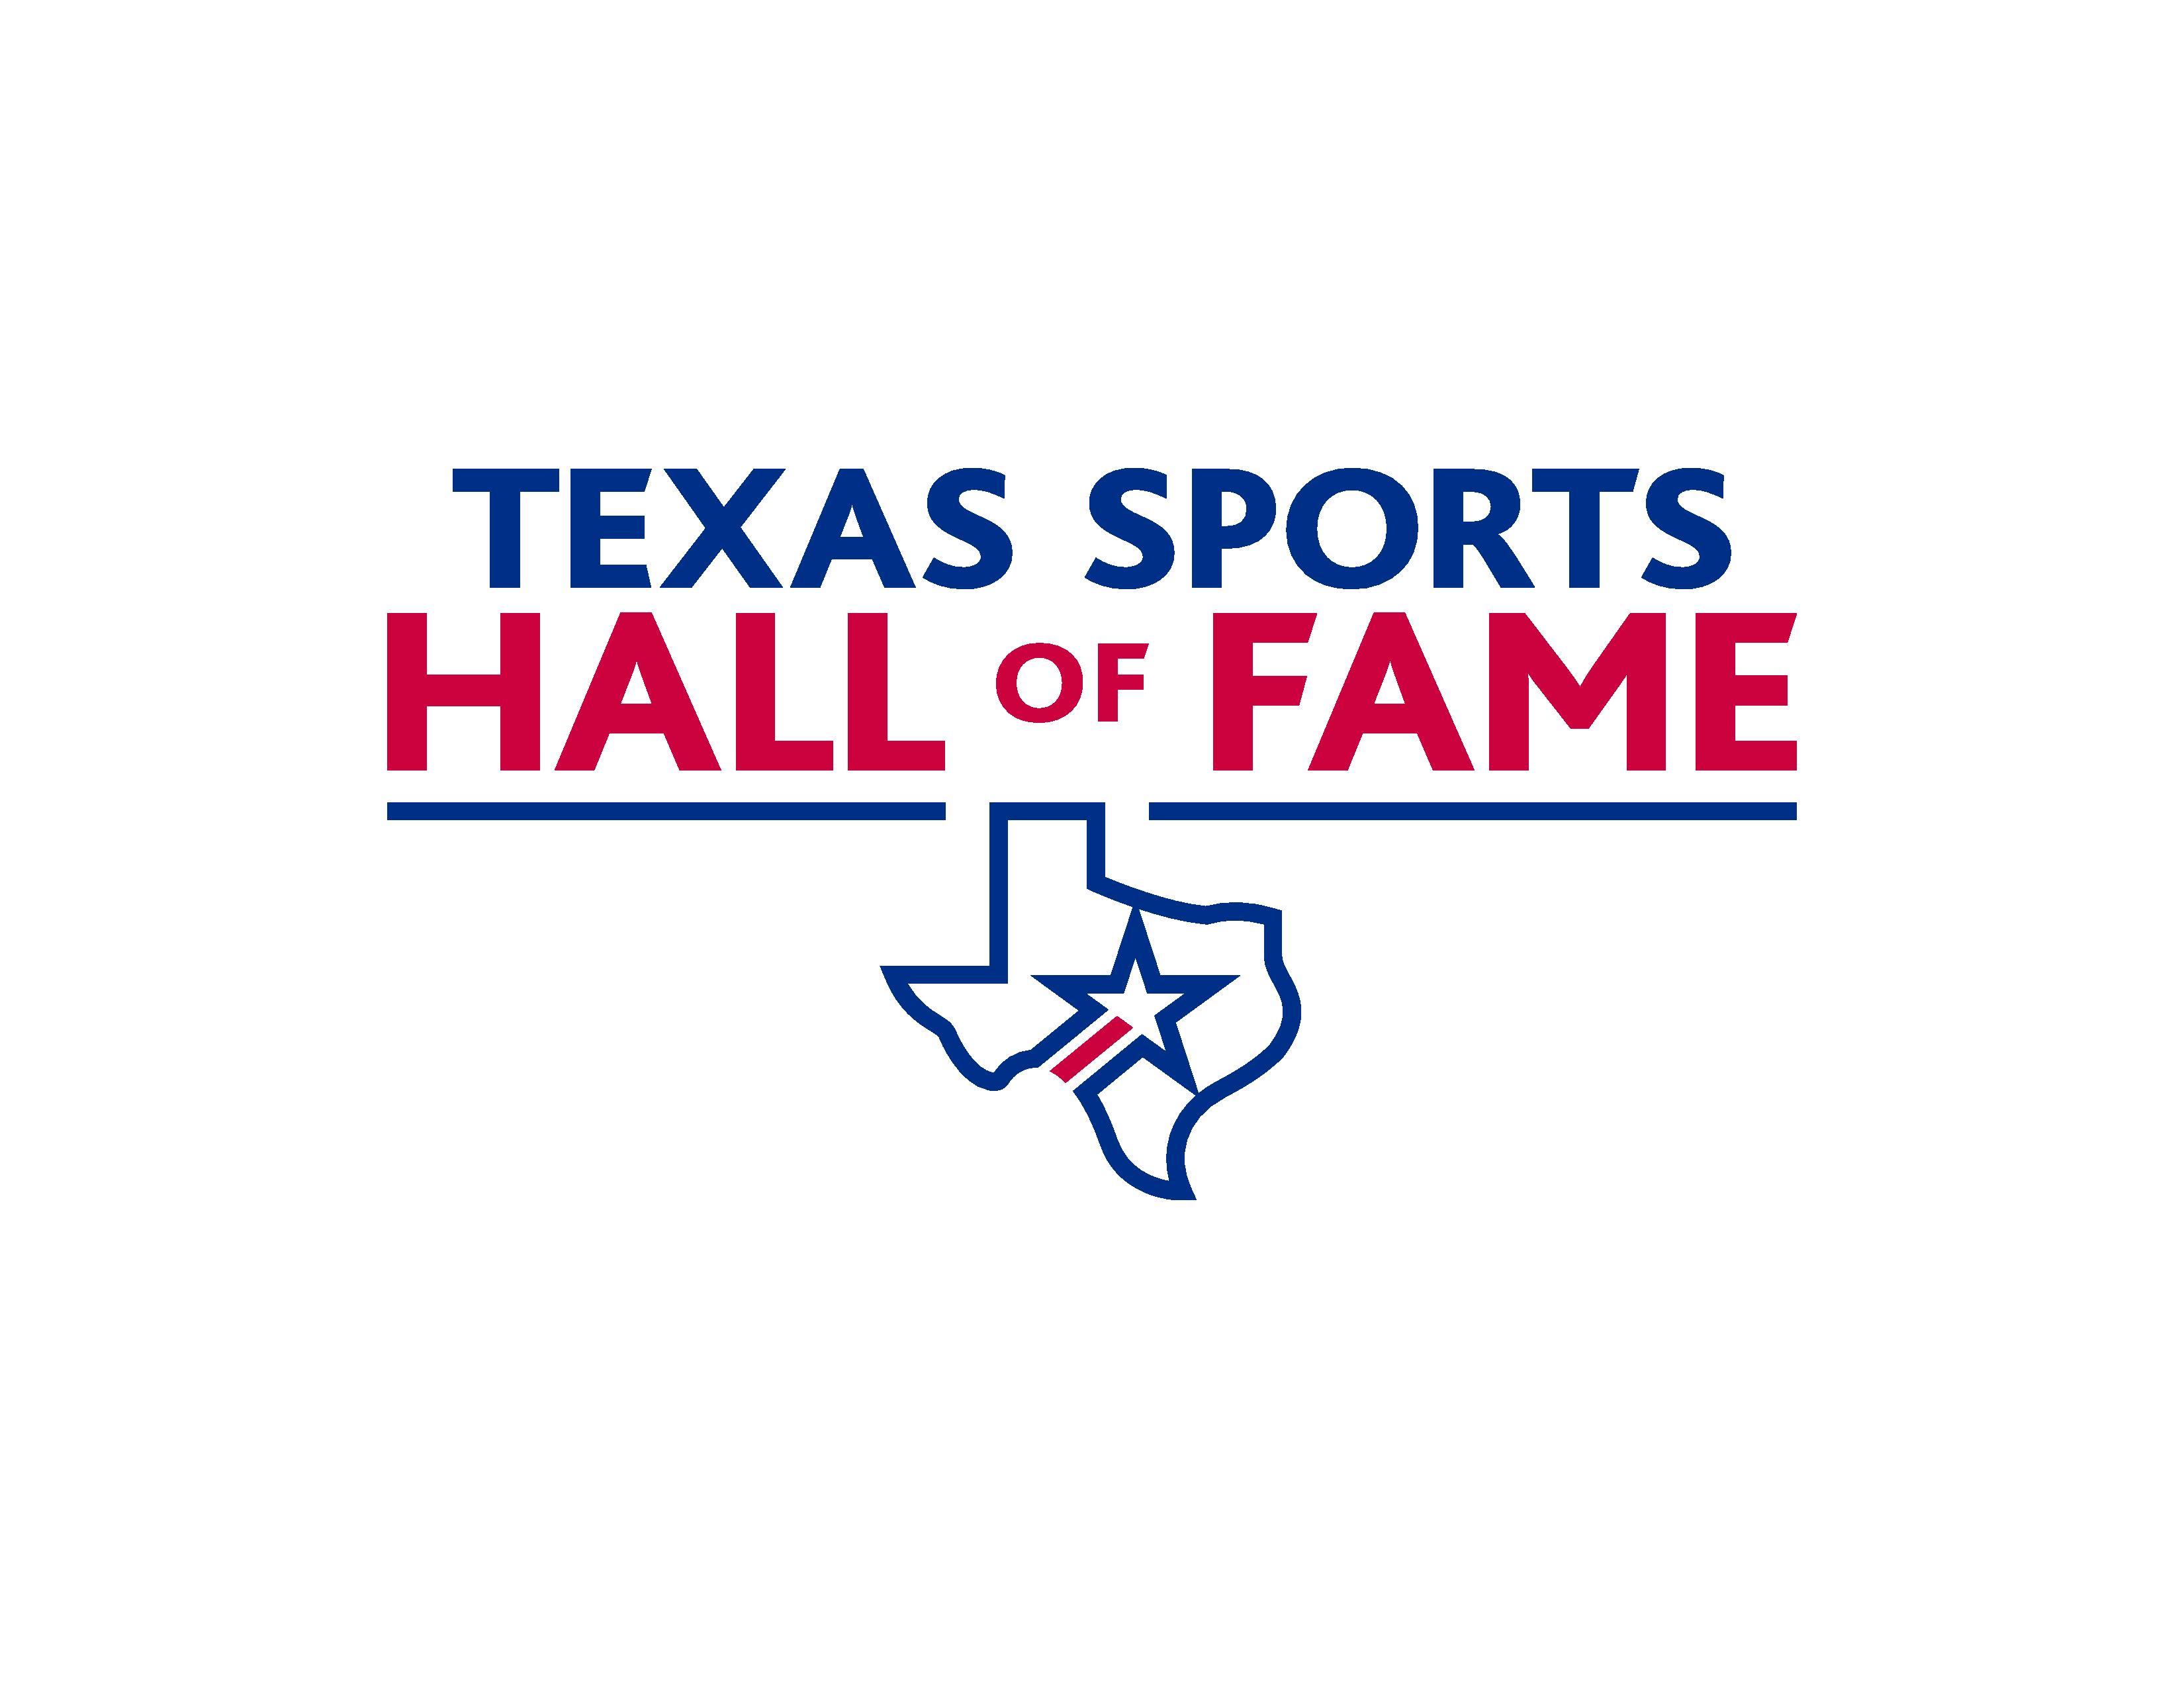 Texas Sports Hall of Fame Announces its 2017 Hall of Fame Inductees